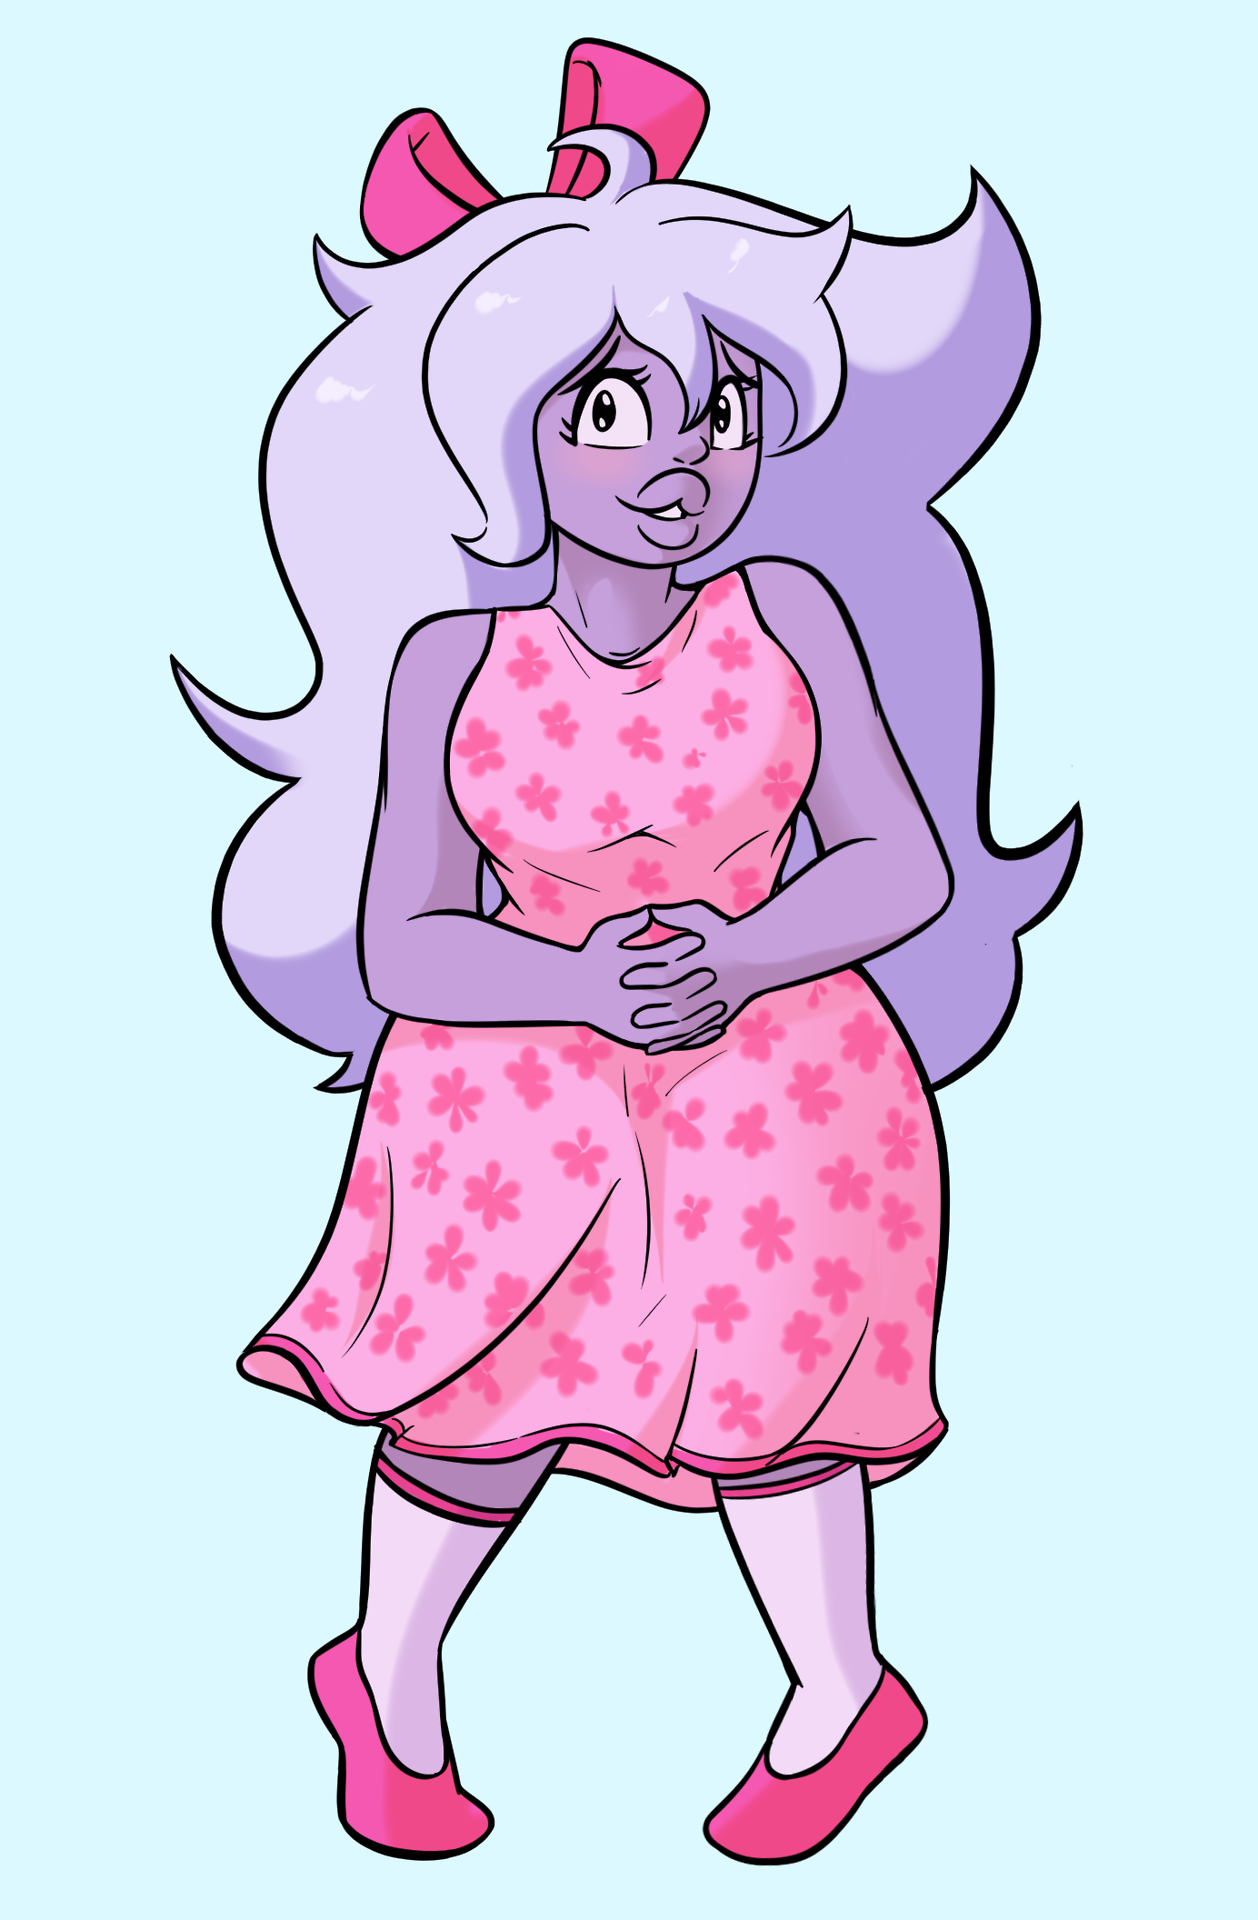 What if Amethyst wore pretty dresses?